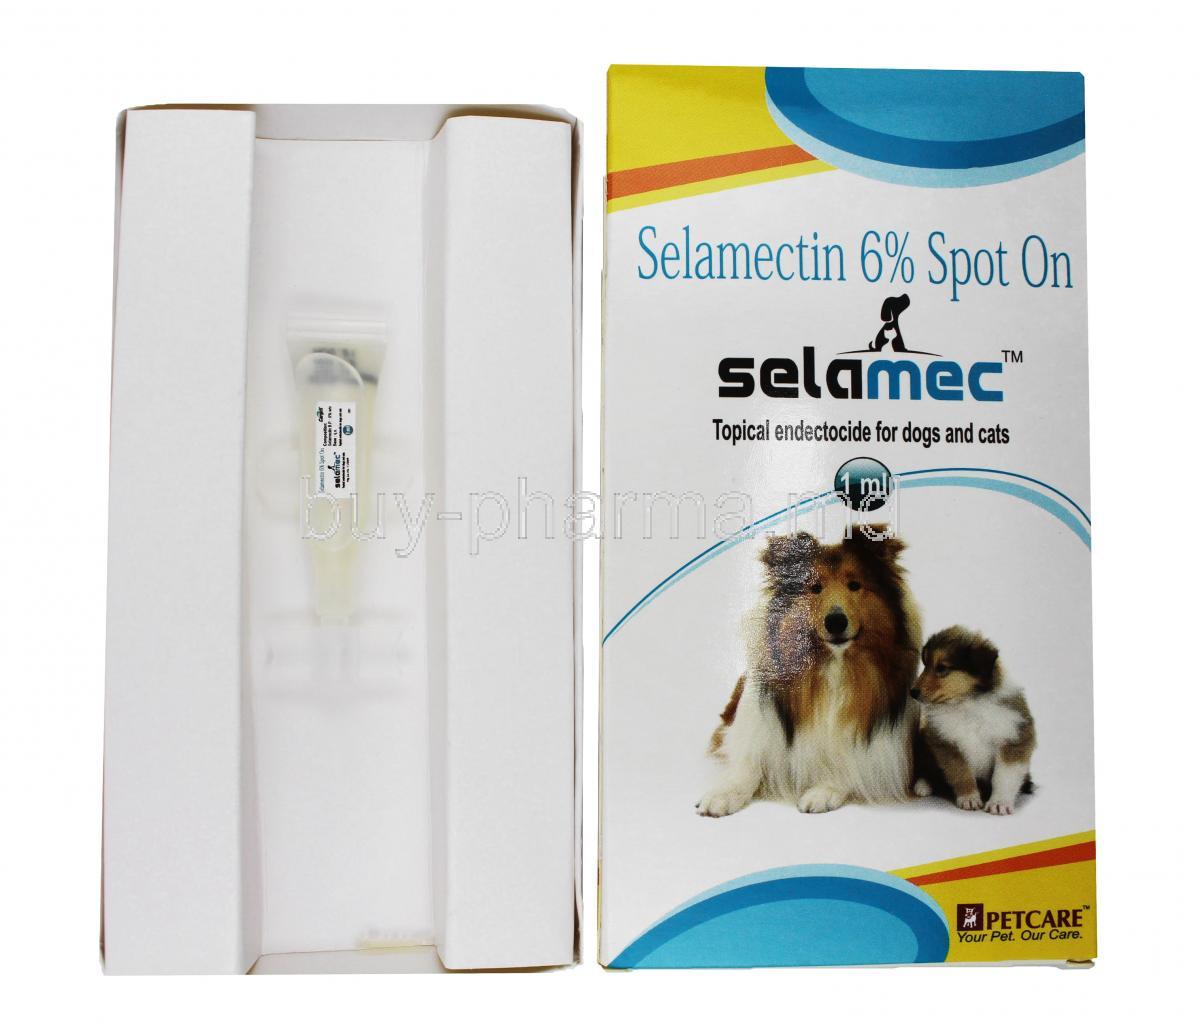 SELAMEC Spot on, Selamection 6%, Box and Pipette